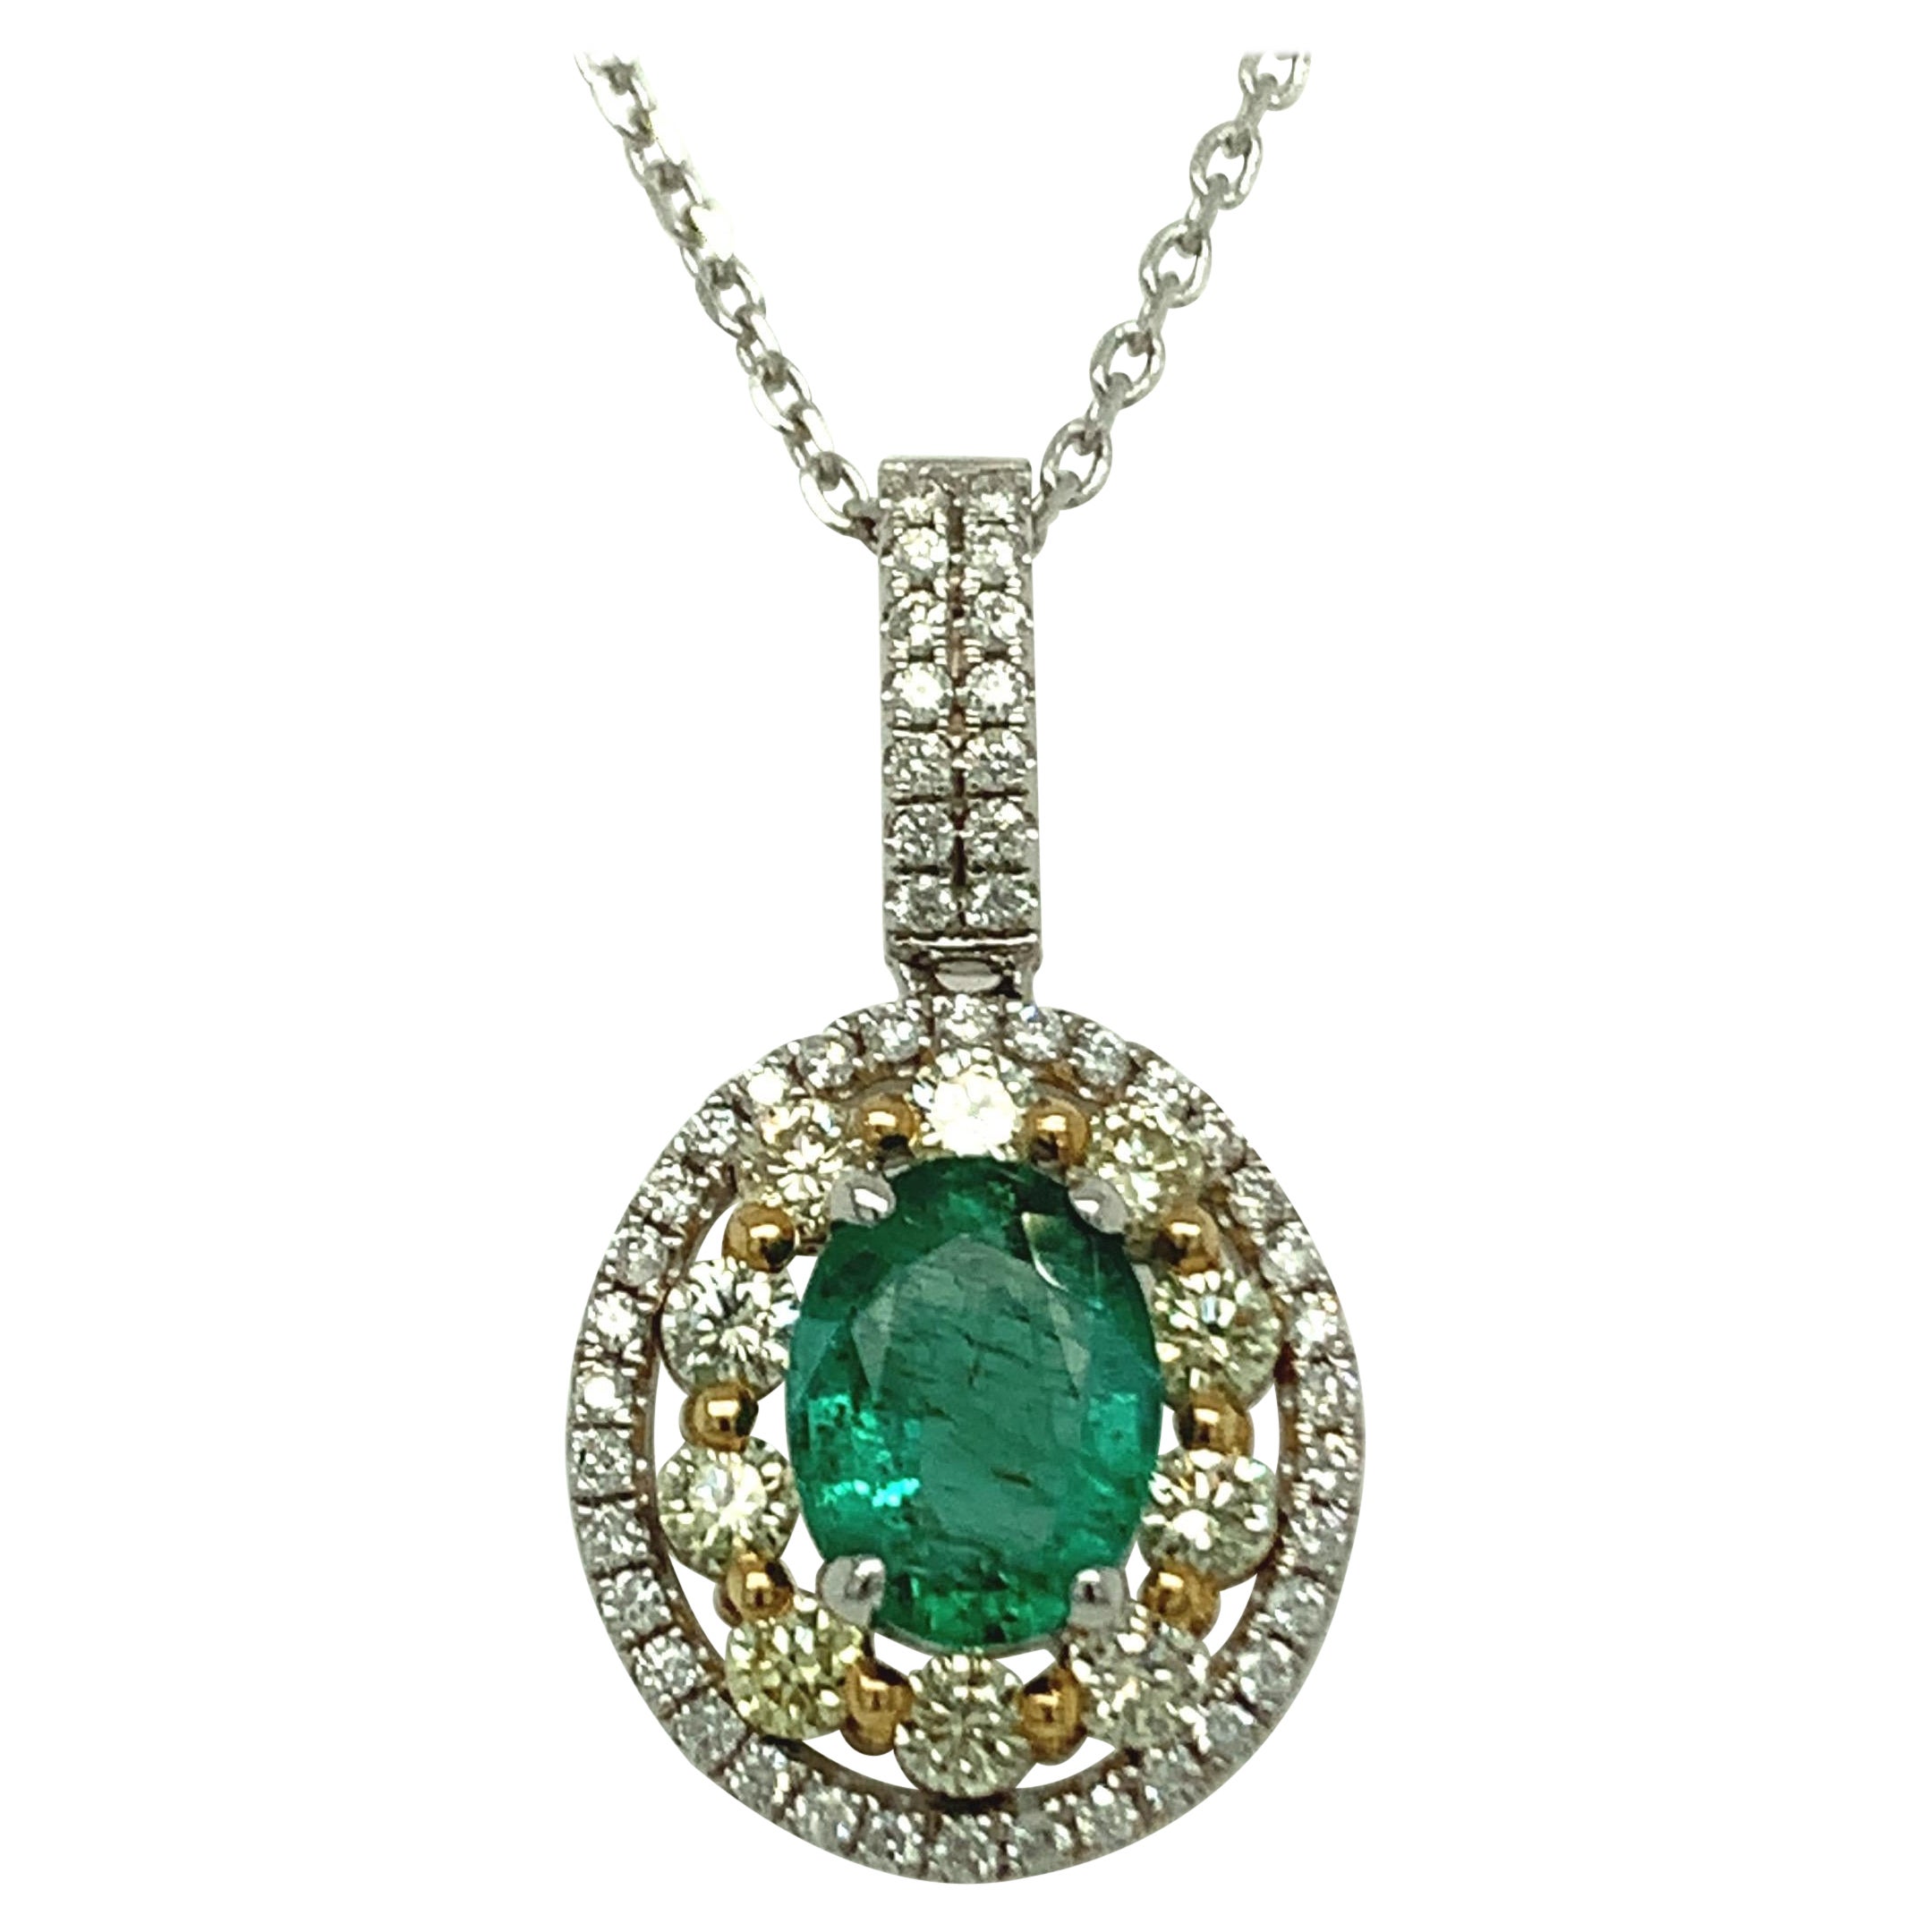 1.24 Carat Emerald Pendant with Yellow and White Diamond Set in Two Tone Gold 